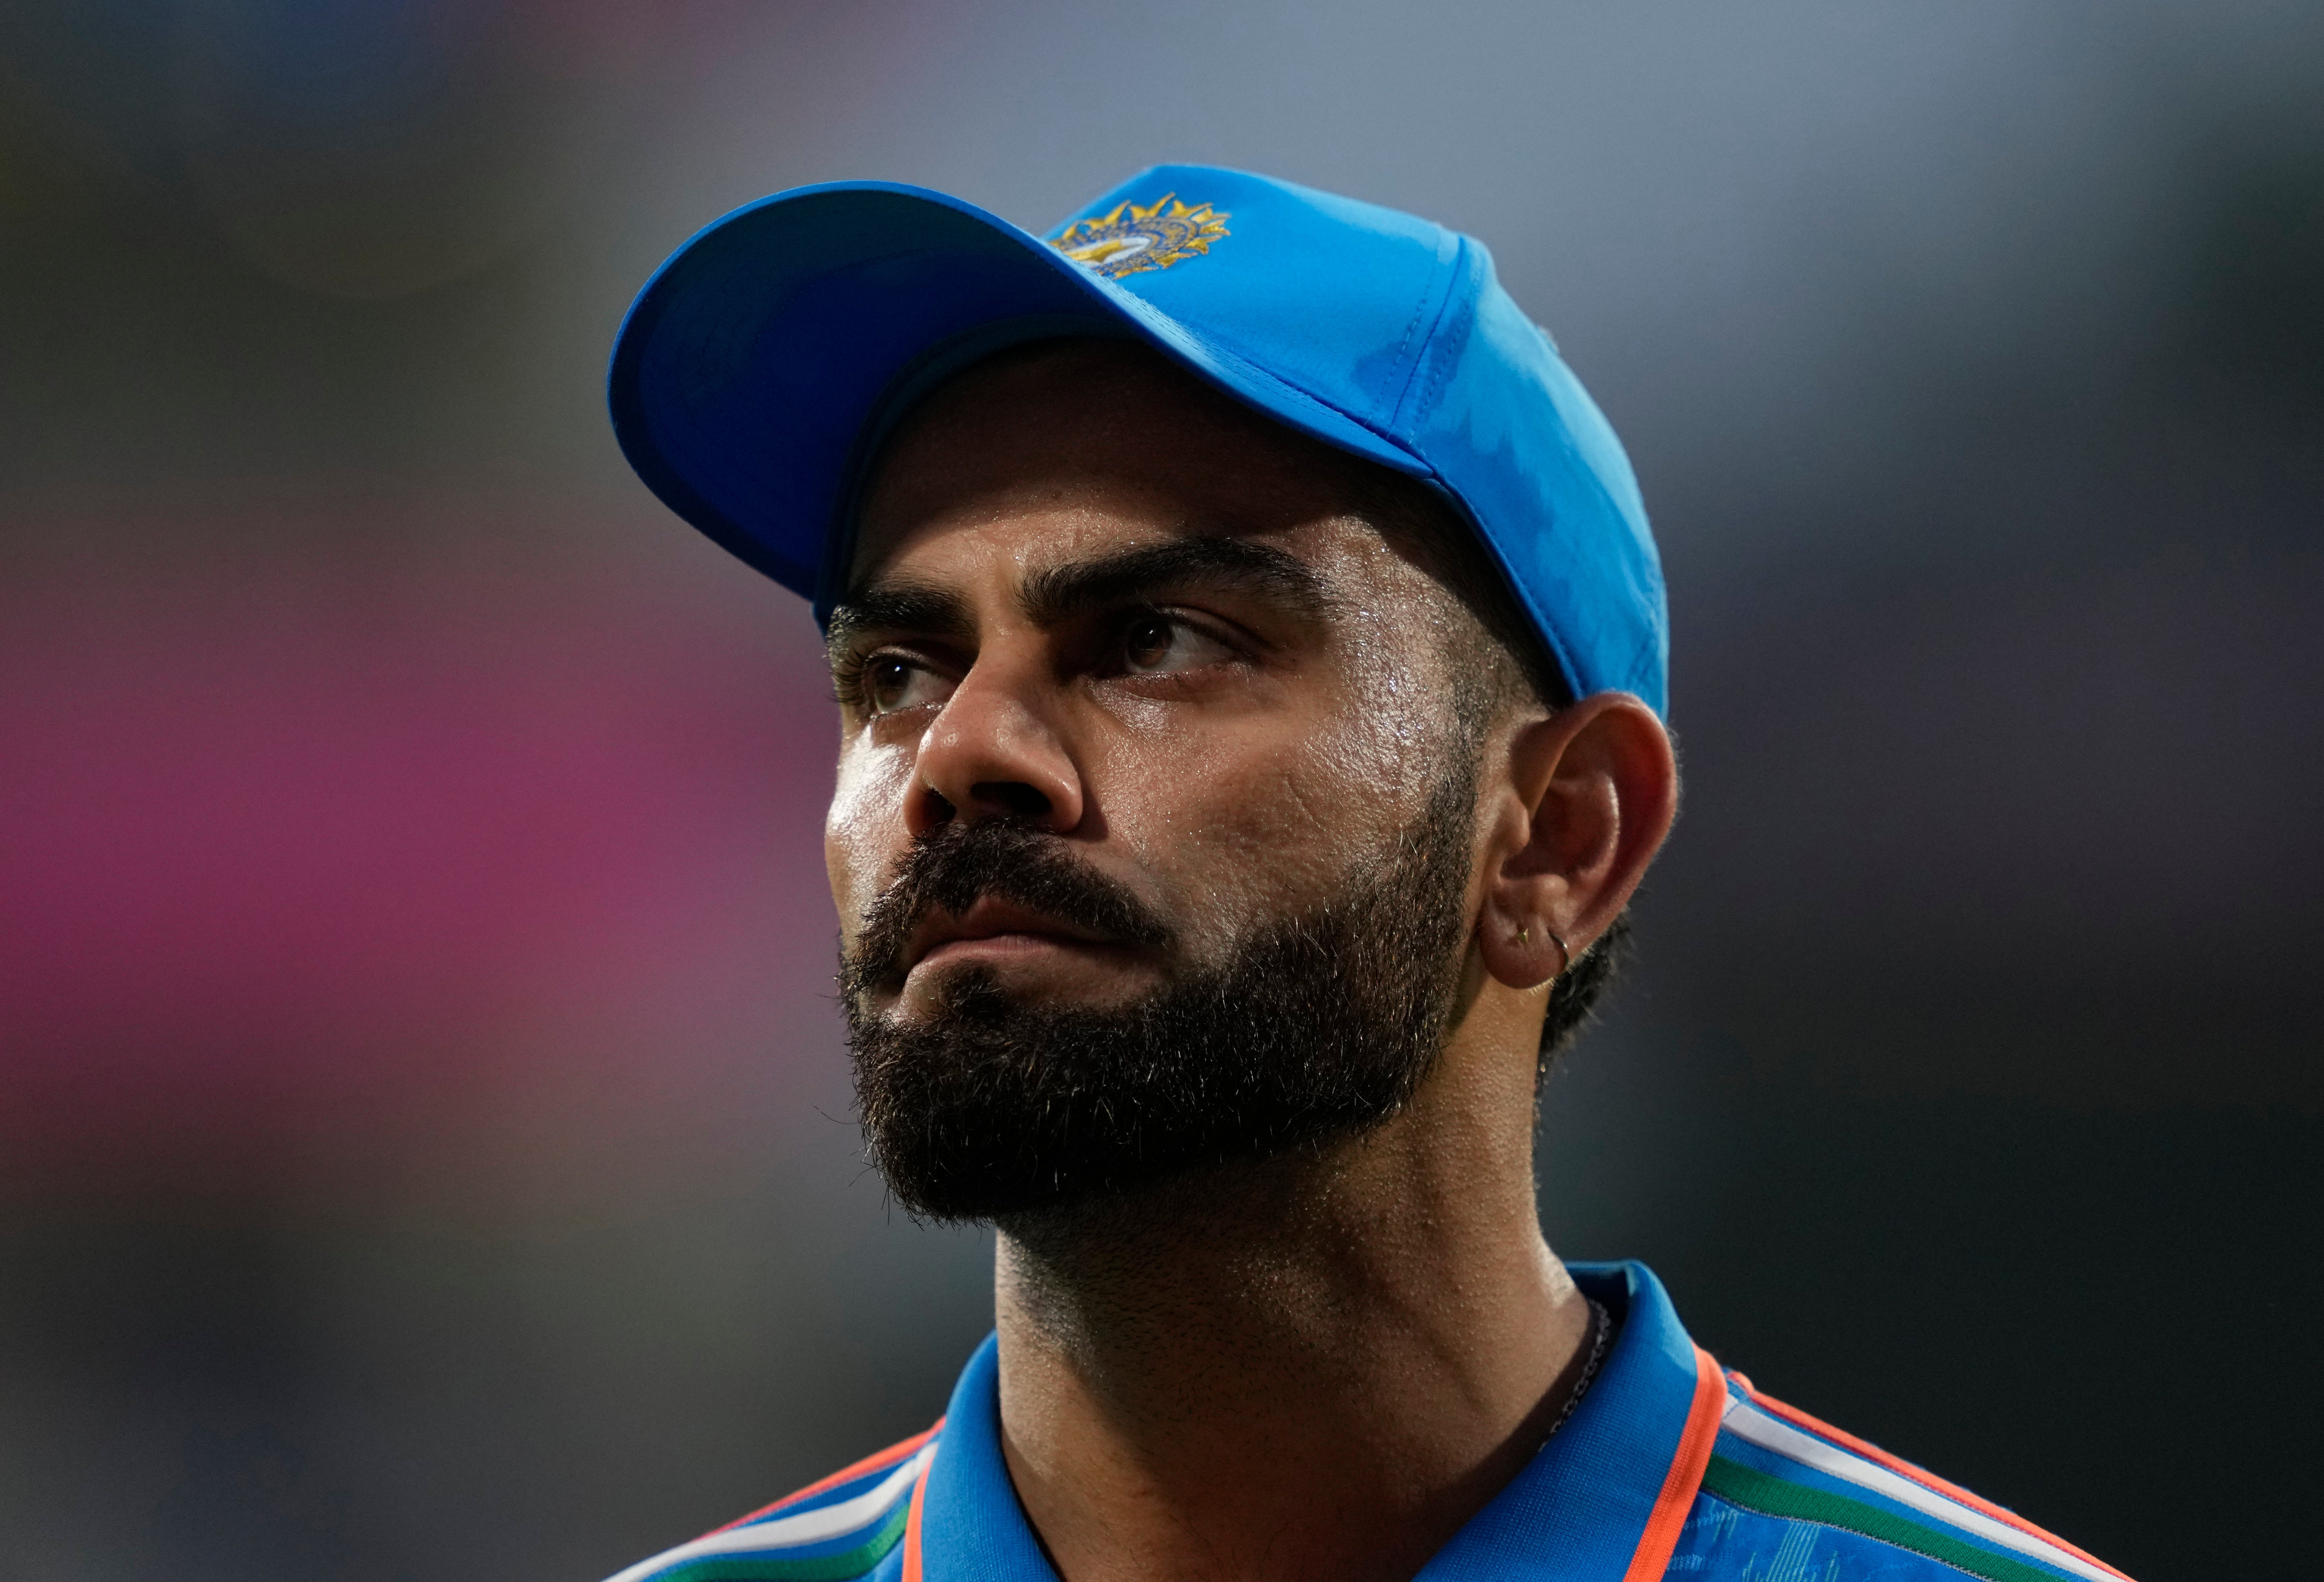 Virat Kohli fields during the ICC Men's Cricket World Cup match between India and Australia in Chennai